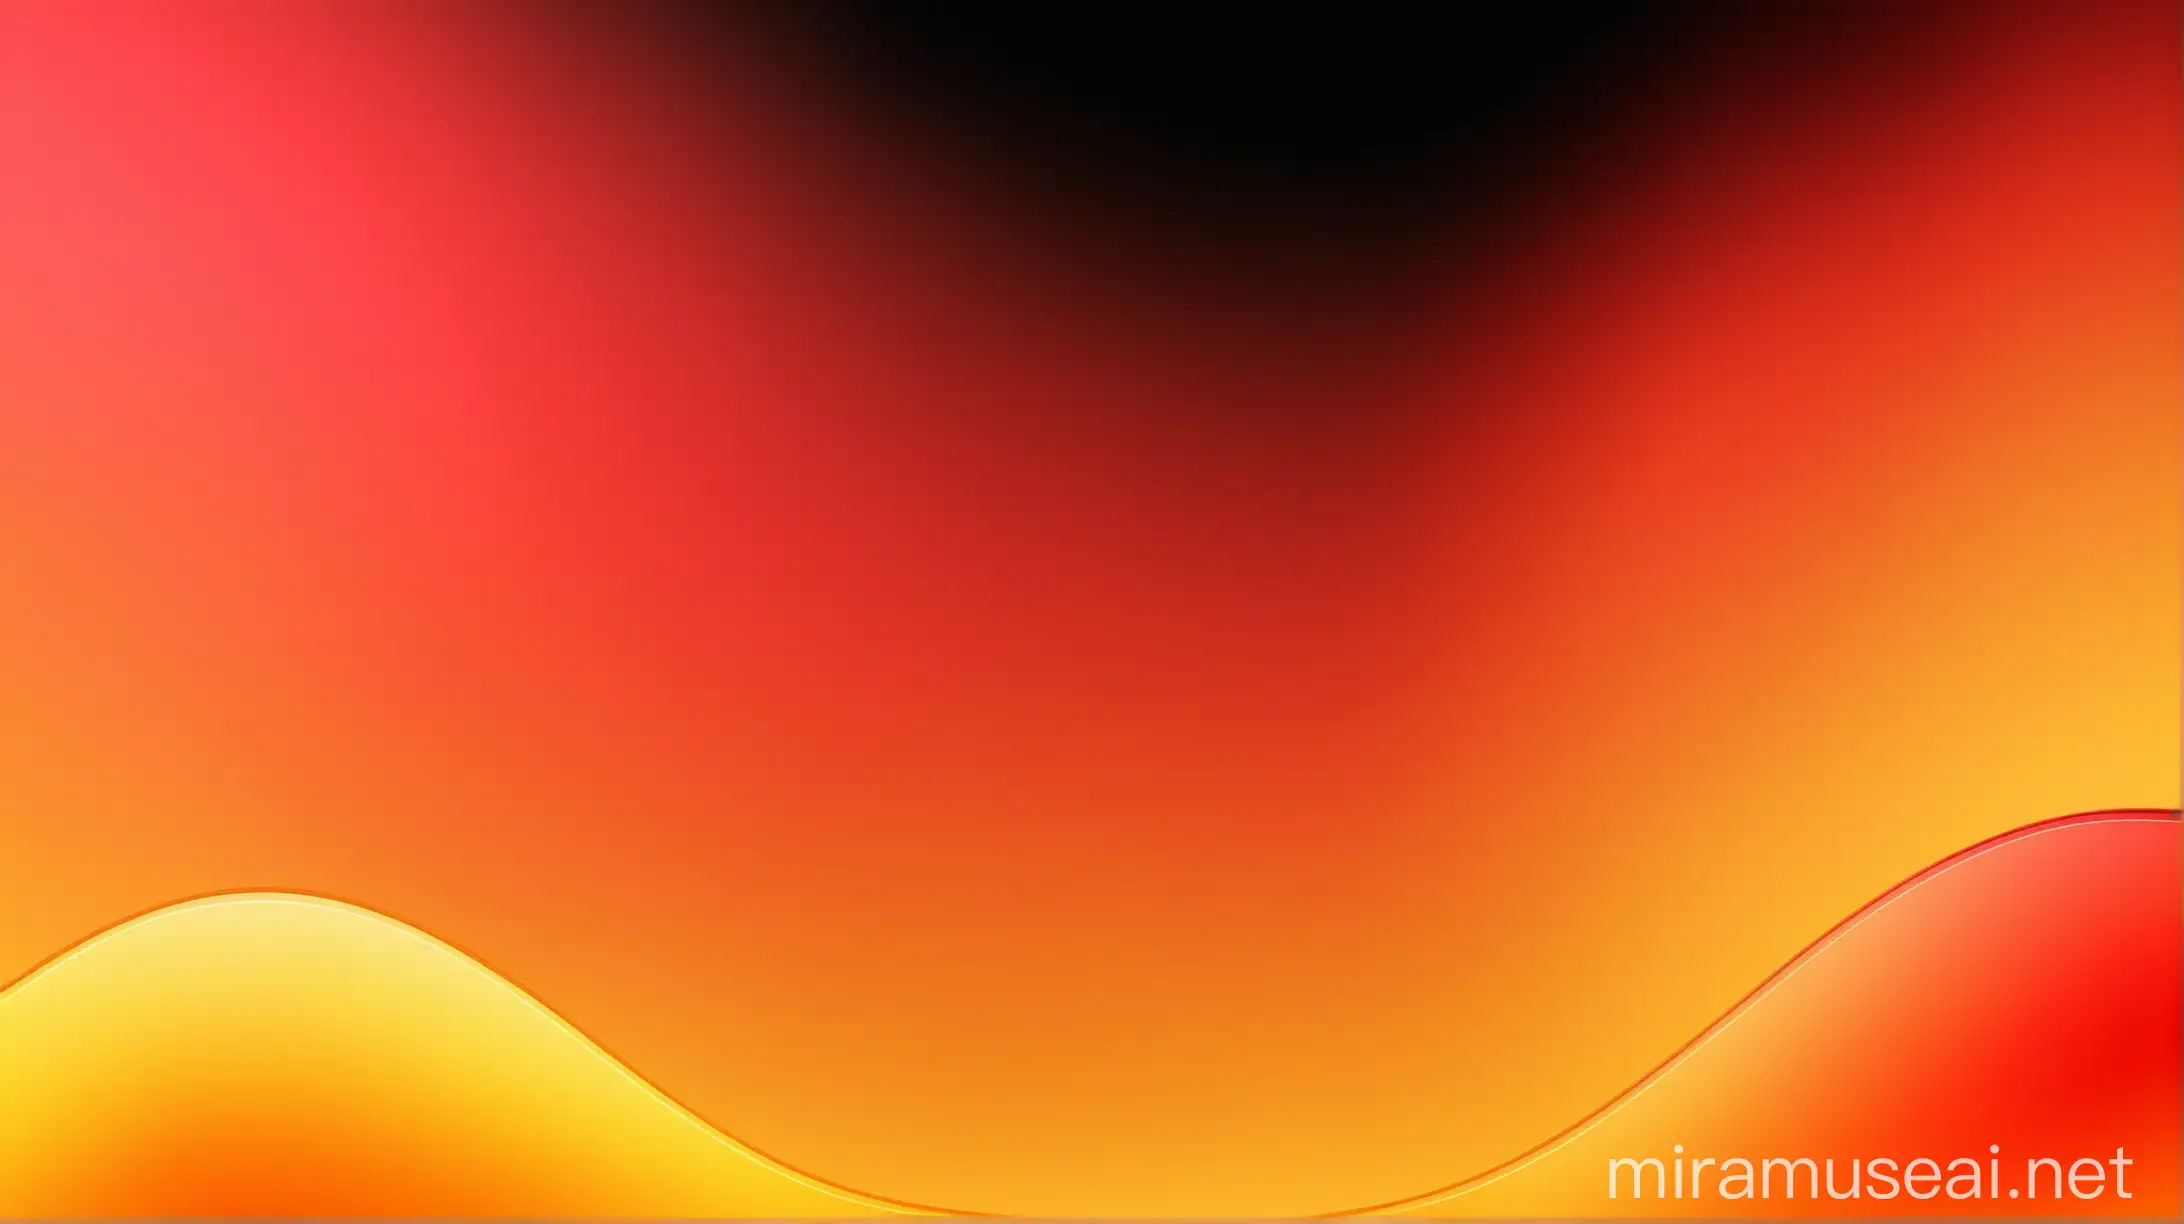 Vibrant Gradient Wavy Background Wallpaper in Orange White Red Yellow and Black